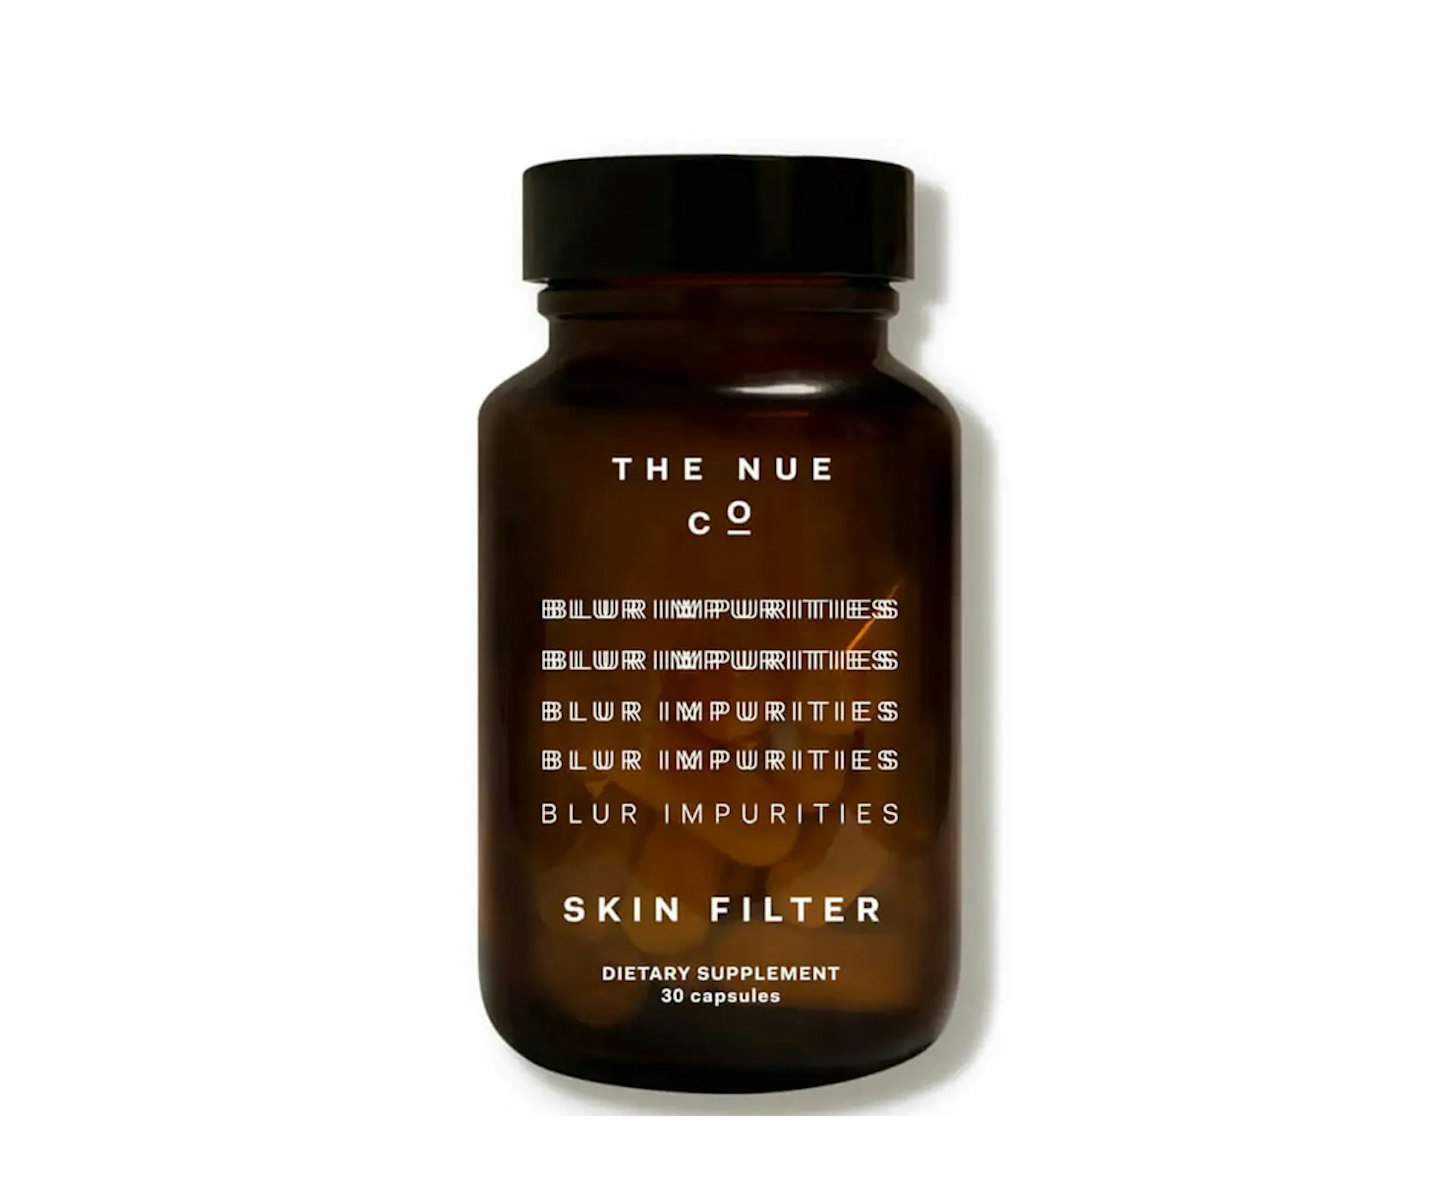 THE NUE CO. SKIN FILTER 30 CAPSULES